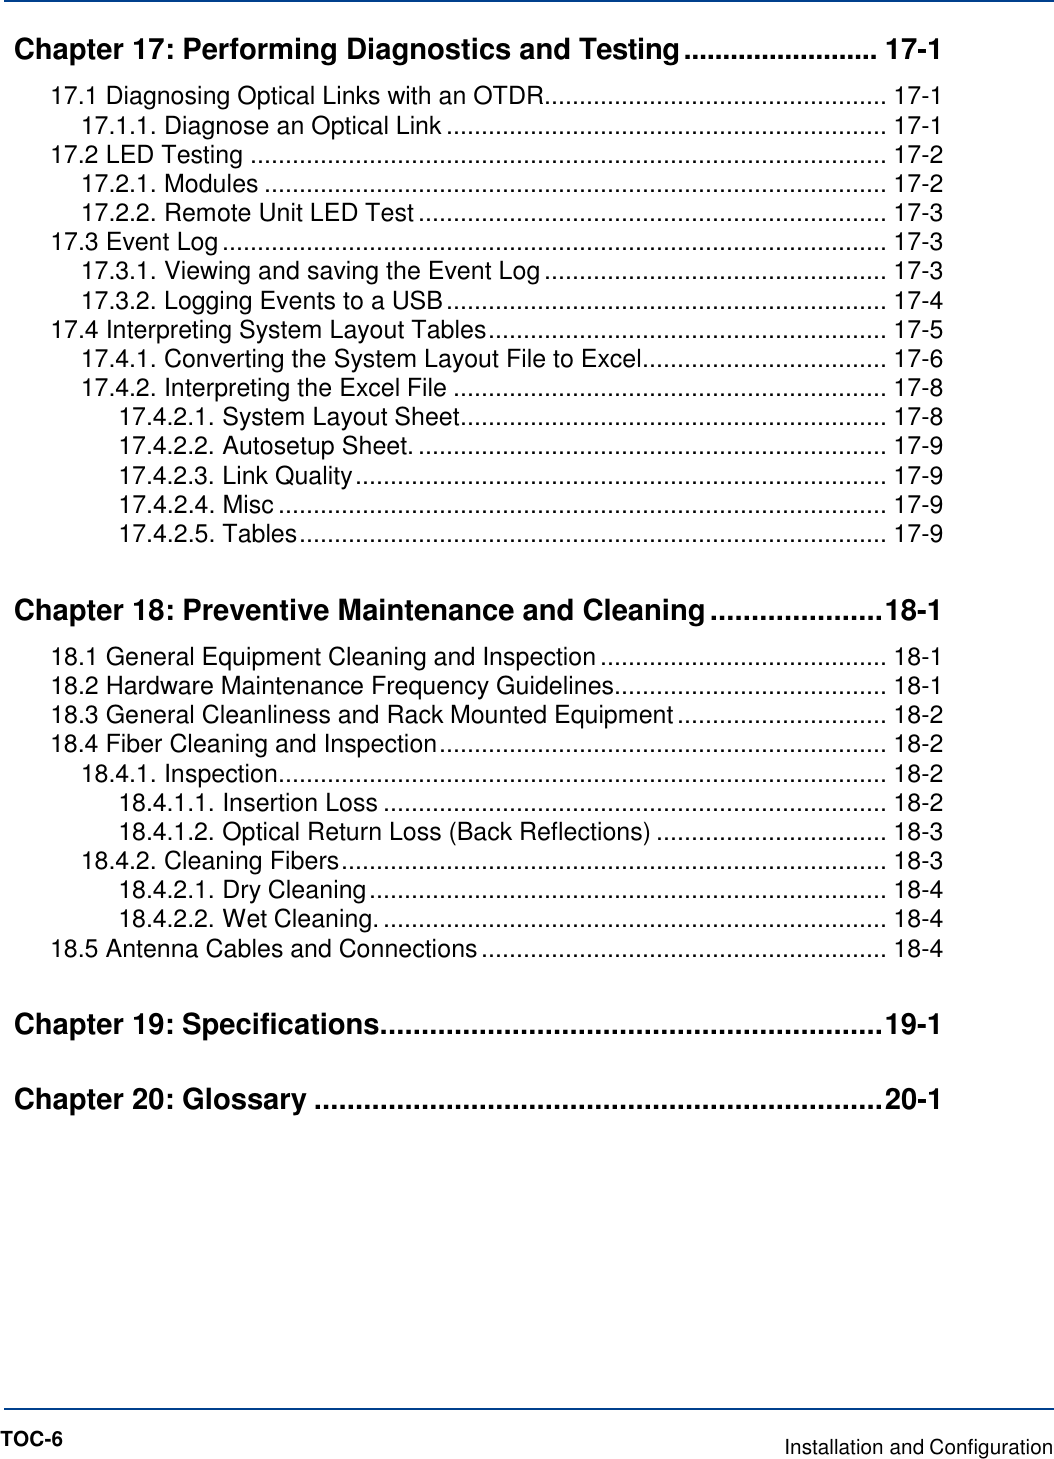   Chapter 17: Performing Diagnostics and Testing ......................... 17-1 17.1 Diagnosing Optical Links with an OTDR................................................. 17-1 17.1.1. Diagnose an Optical Link ............................................................... 17-1 17.2 LED Testing ........................................................................................... 17-2 17.2.1. Modules ......................................................................................... 17-2 17.2.2. Remote Unit LED Test ................................................................... 17-3 17.3 Event Log ............................................................................................... 17-3 17.3.1. Viewing and saving the Event Log ................................................. 17-3 17.3.2. Logging Events to a USB ............................................................... 17-4 17.4 Interpreting System Layout Tables ......................................................... 17-5 17.4.1. Converting the System Layout File to Excel ................................... 17-6 17.4.2. Interpreting the Excel File .............................................................. 17-8 17.4.2.1. System Layout Sheet ............................................................. 17-8 17.4.2.2. Autosetup Sheet. ................................................................... 17-9 17.4.2.3. Link Quality ............................................................................ 17-9 17.4.2.4. Misc ....................................................................................... 17-9 17.4.2.5. Tables .................................................................................... 17-9 Chapter 18: Preventive Maintenance and Cleaning ..................... 18-1 18.1 General Equipment Cleaning and Inspection ......................................... 18-1 18.2 Hardware Maintenance Frequency Guidelines....................................... 18-1 18.3 General Cleanliness and Rack Mounted Equipment .............................. 18-2 18.4 Fiber Cleaning and Inspection ................................................................ 18-2 18.4.1. Inspection....................................................................................... 18-2 18.4.1.1. Insertion Loss ........................................................................ 18-2 18.4.1.2. Optical Return Loss (Back Reflections) ................................. 18-3 18.4.2. Cleaning Fibers .............................................................................. 18-3 18.4.2.1. Dry Cleaning .......................................................................... 18-4 18.4.2.2. Wet Cleaning. ........................................................................ 18-4 18.5 Antenna Cables and Connections .......................................................... 18-4 Chapter 19: Specifications. ............................................................ 19-1 Chapter 20: Glossary ..................................................................... 20-1             TOC-6  Installation and Configuration 